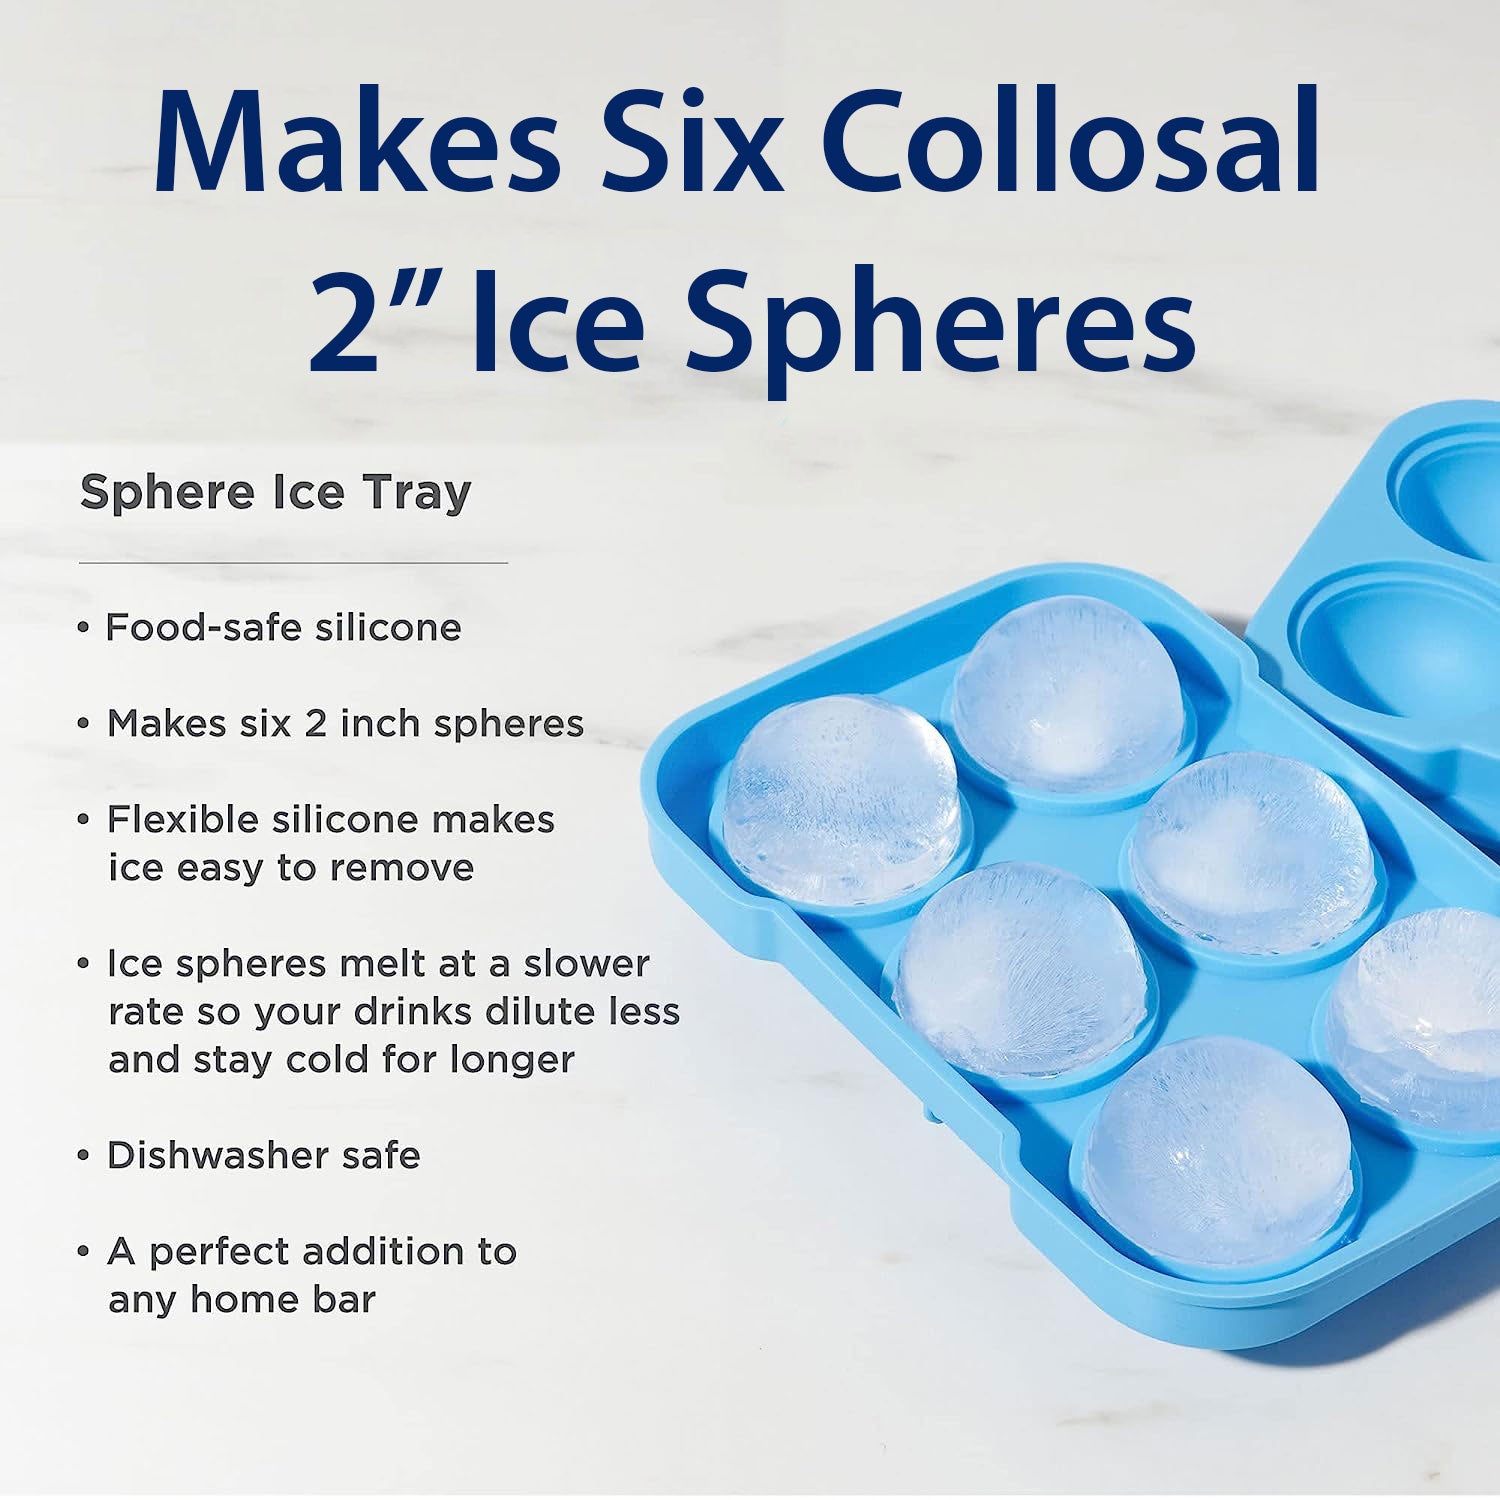 2 Silicone Ice Sphere Mold (makes 6 spheres) – UnMask